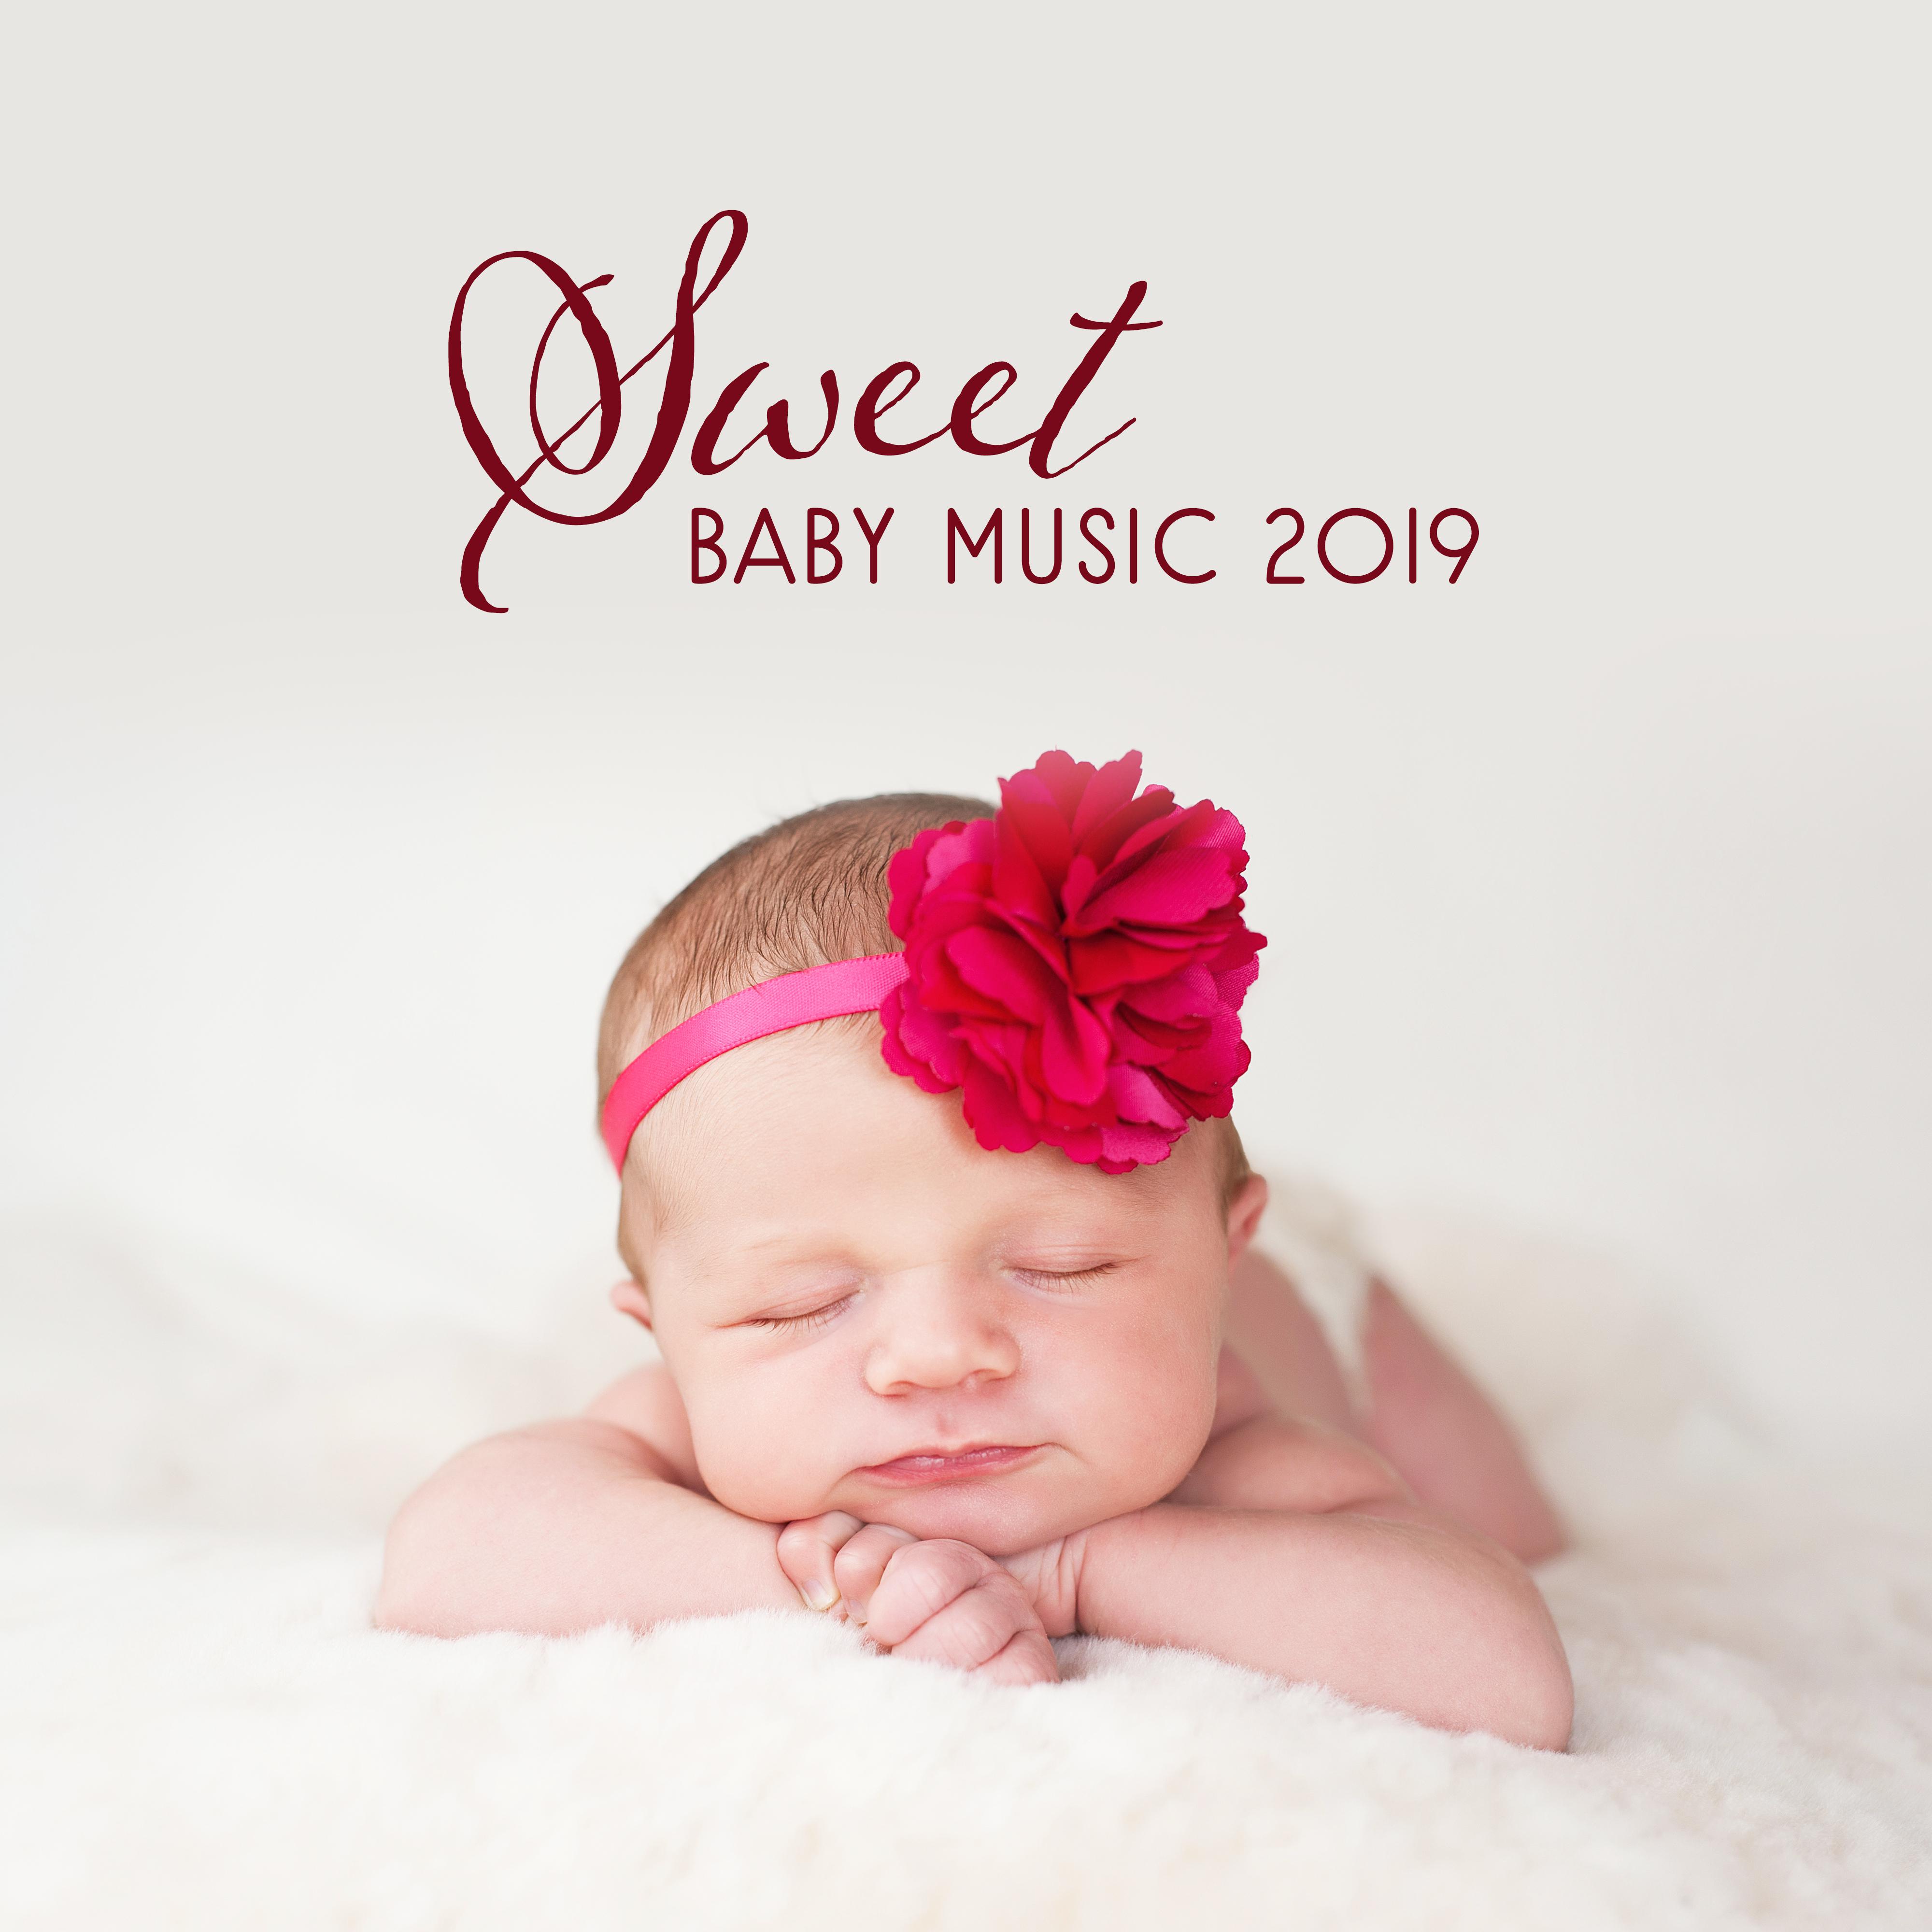 Sweet Baby Music 2019: Nature Sounds for Sleep, Relax Baby & Improve Brain Development, Calming Sounds to Pillow, Bedtime Baby, Ambient Music, Lounge, New Age Lullabies